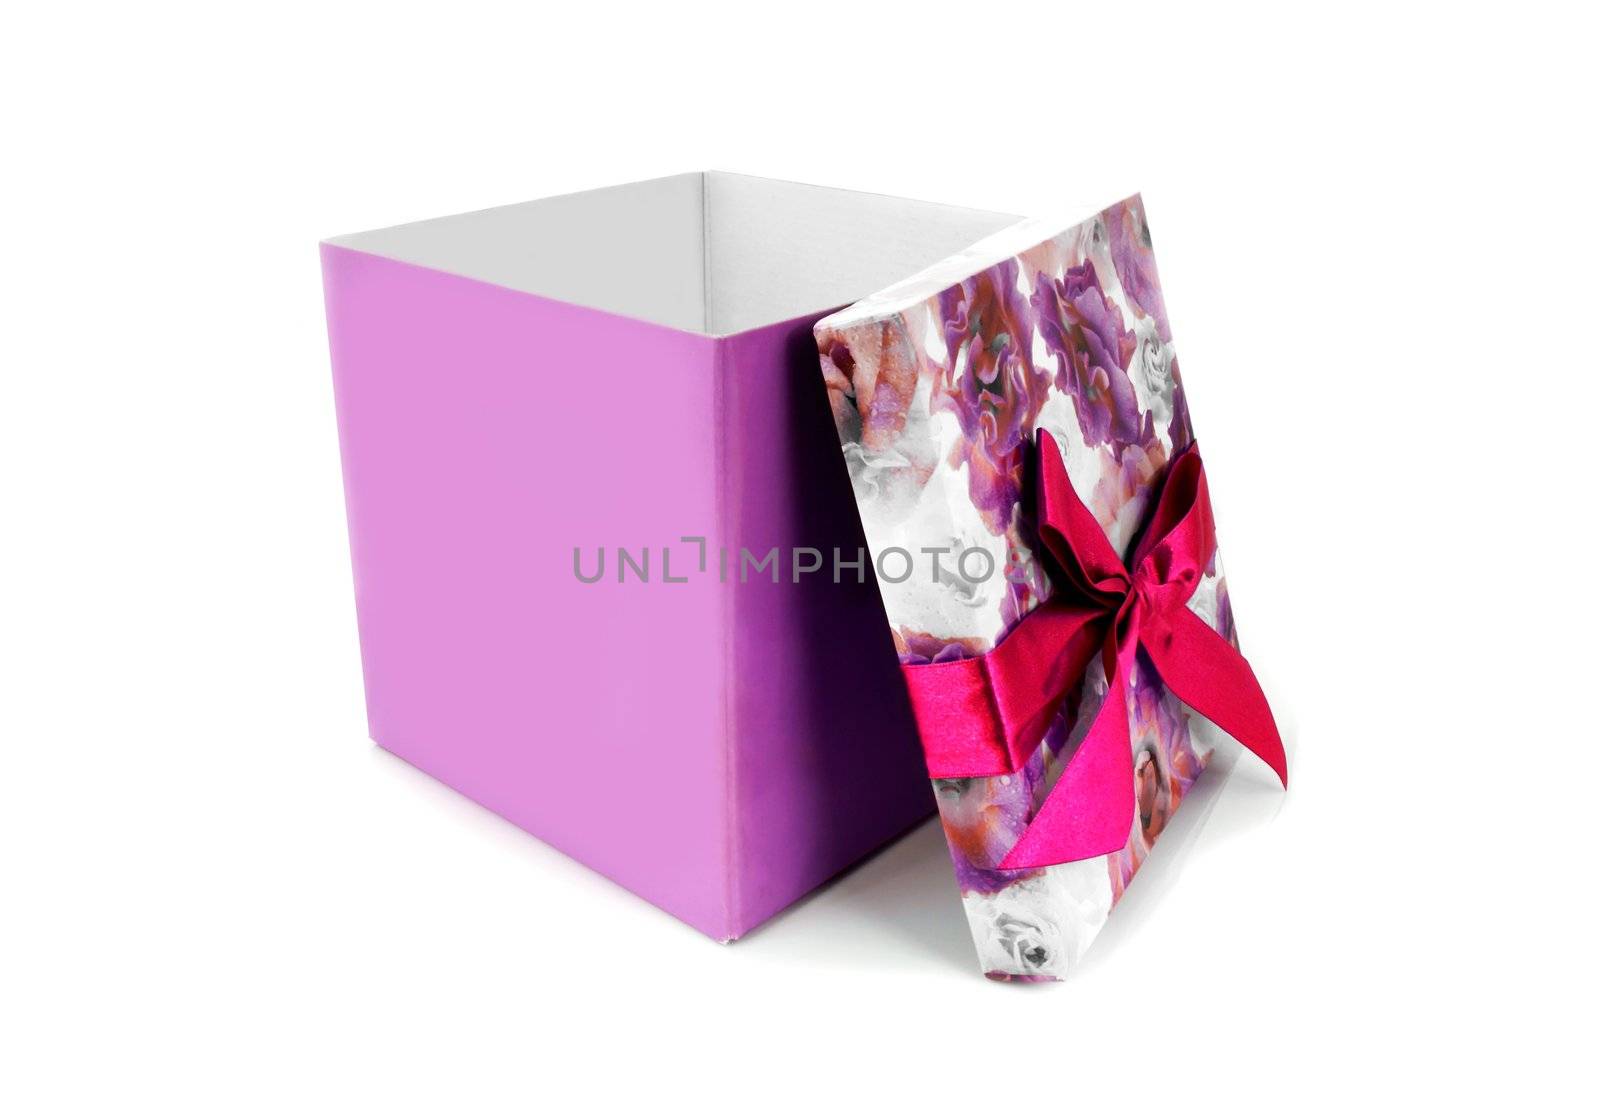 Opened gift box over white background by simpson33